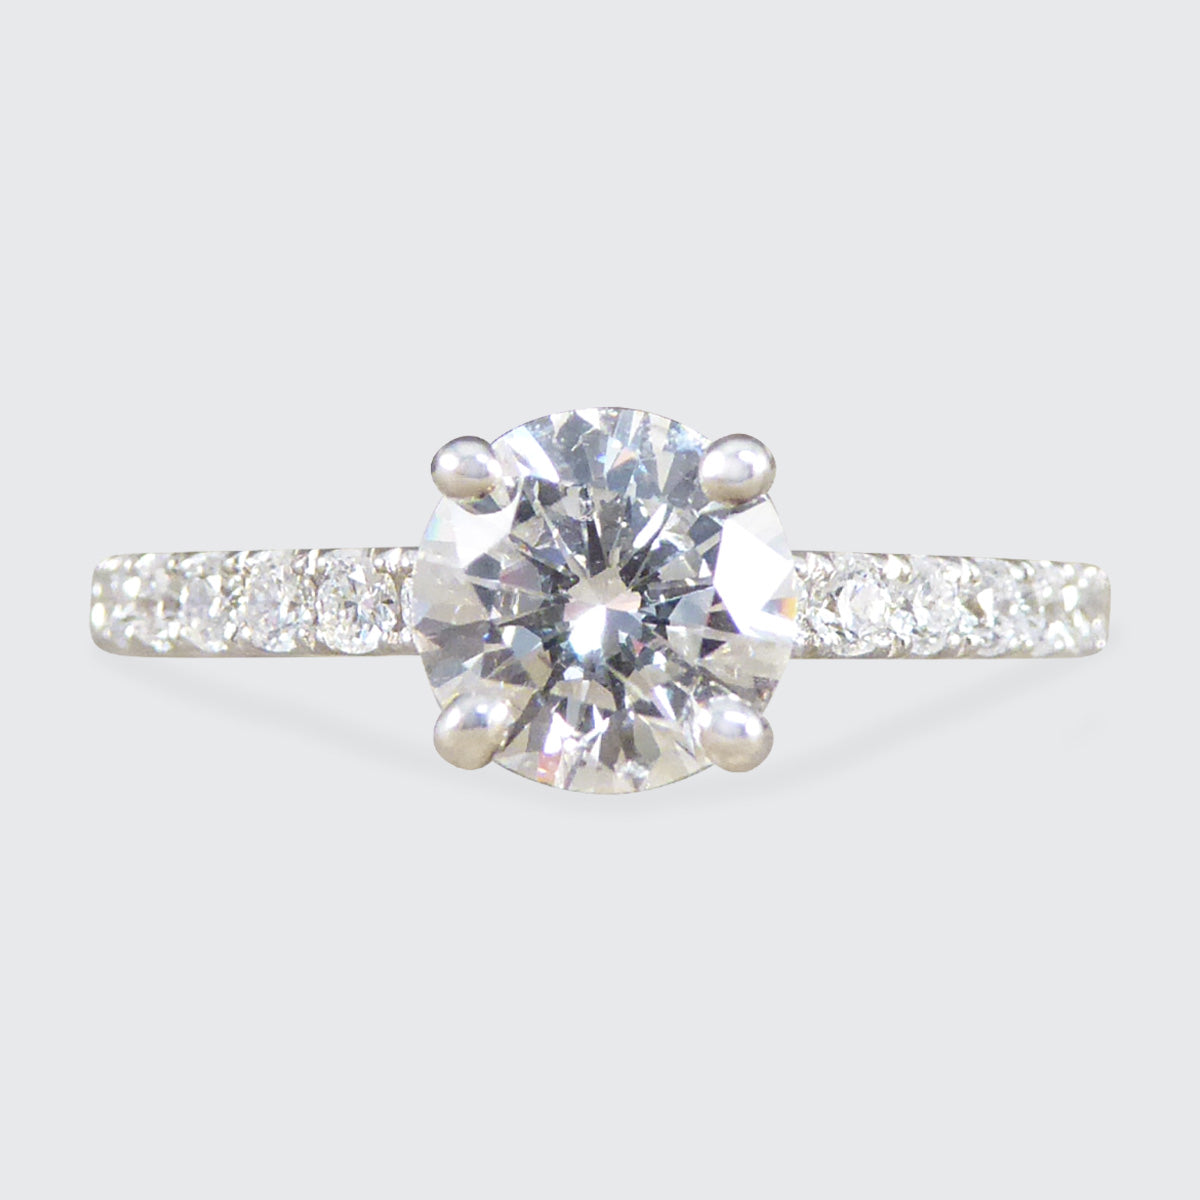 GIA Cert D Colour 0.90ct Brilliant Cut Diamond Solitaire Engagement Ring with Diamond Shoulders in 18ct White Gold